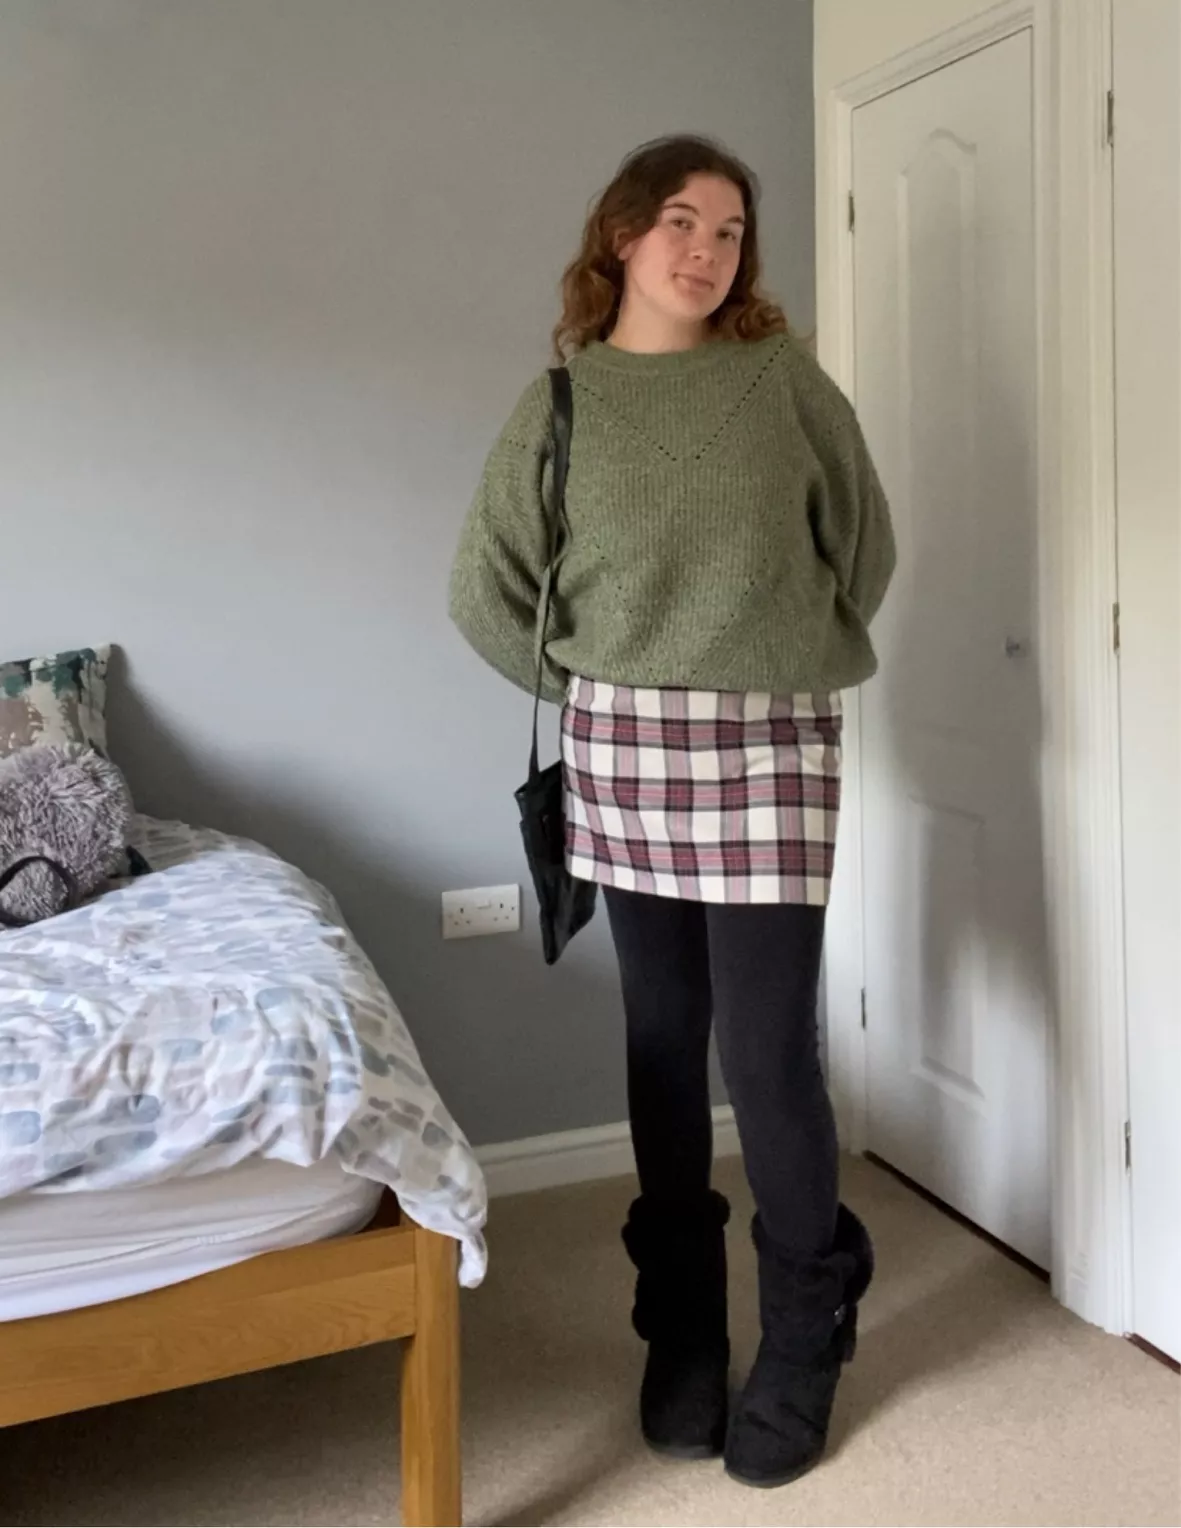 Black Cotton Leggings from Primark on 21 Buttons